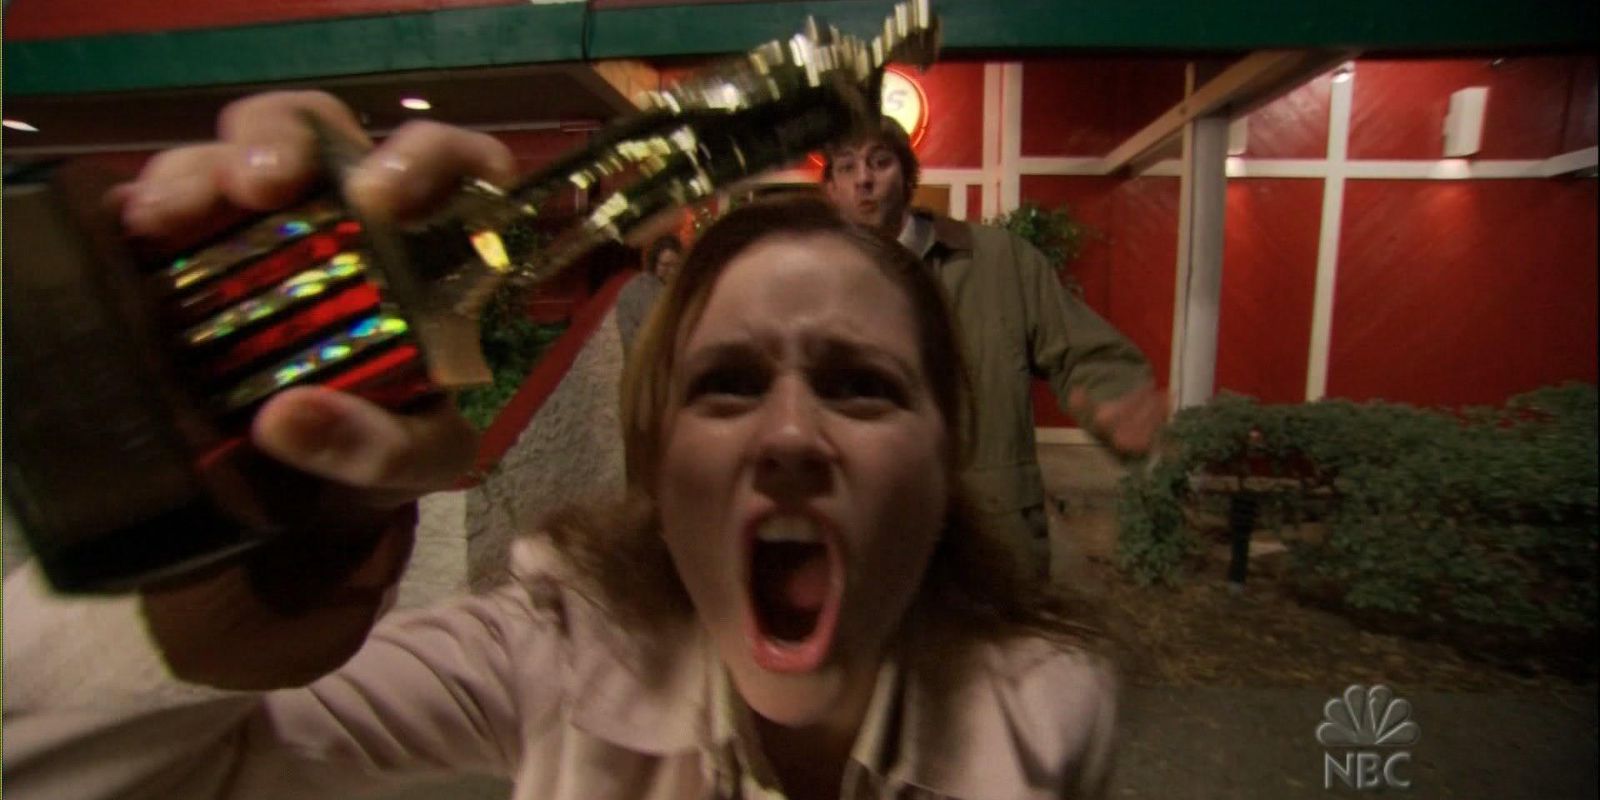 Pam Beesly wins a Dundie at Chili's in The Office.